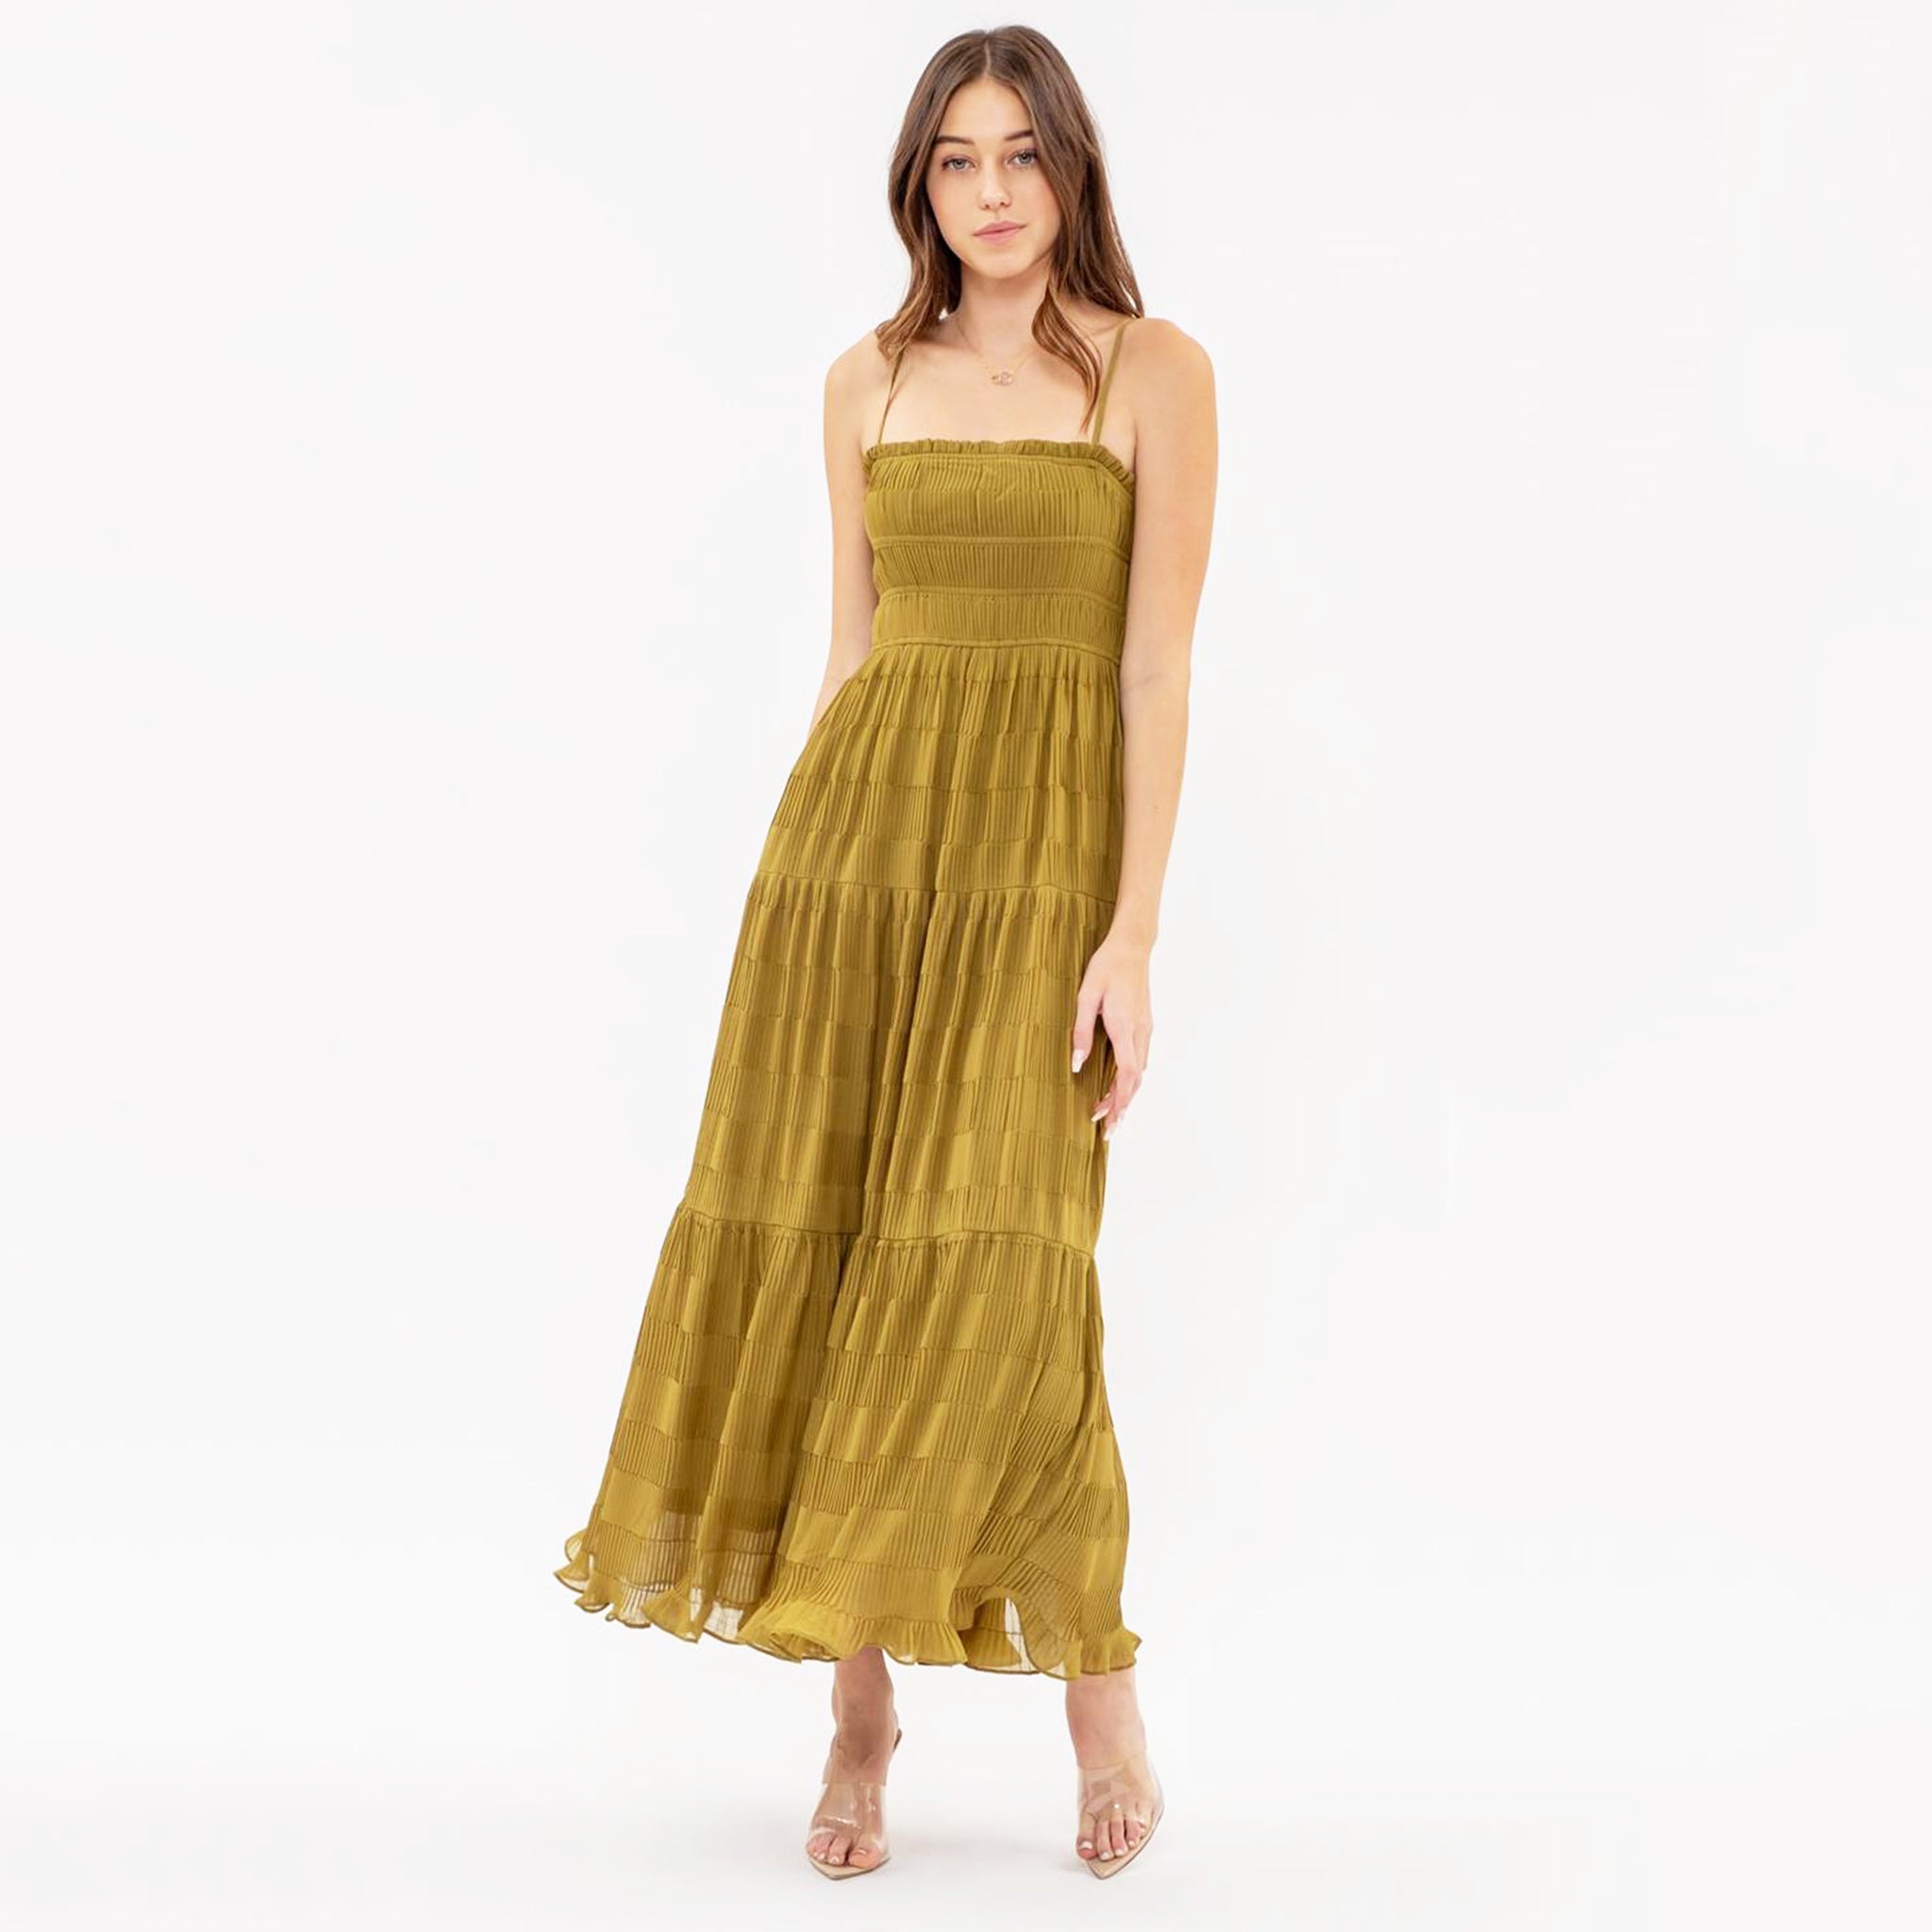 An olive green tiered midi dress with spaghetti straps.  